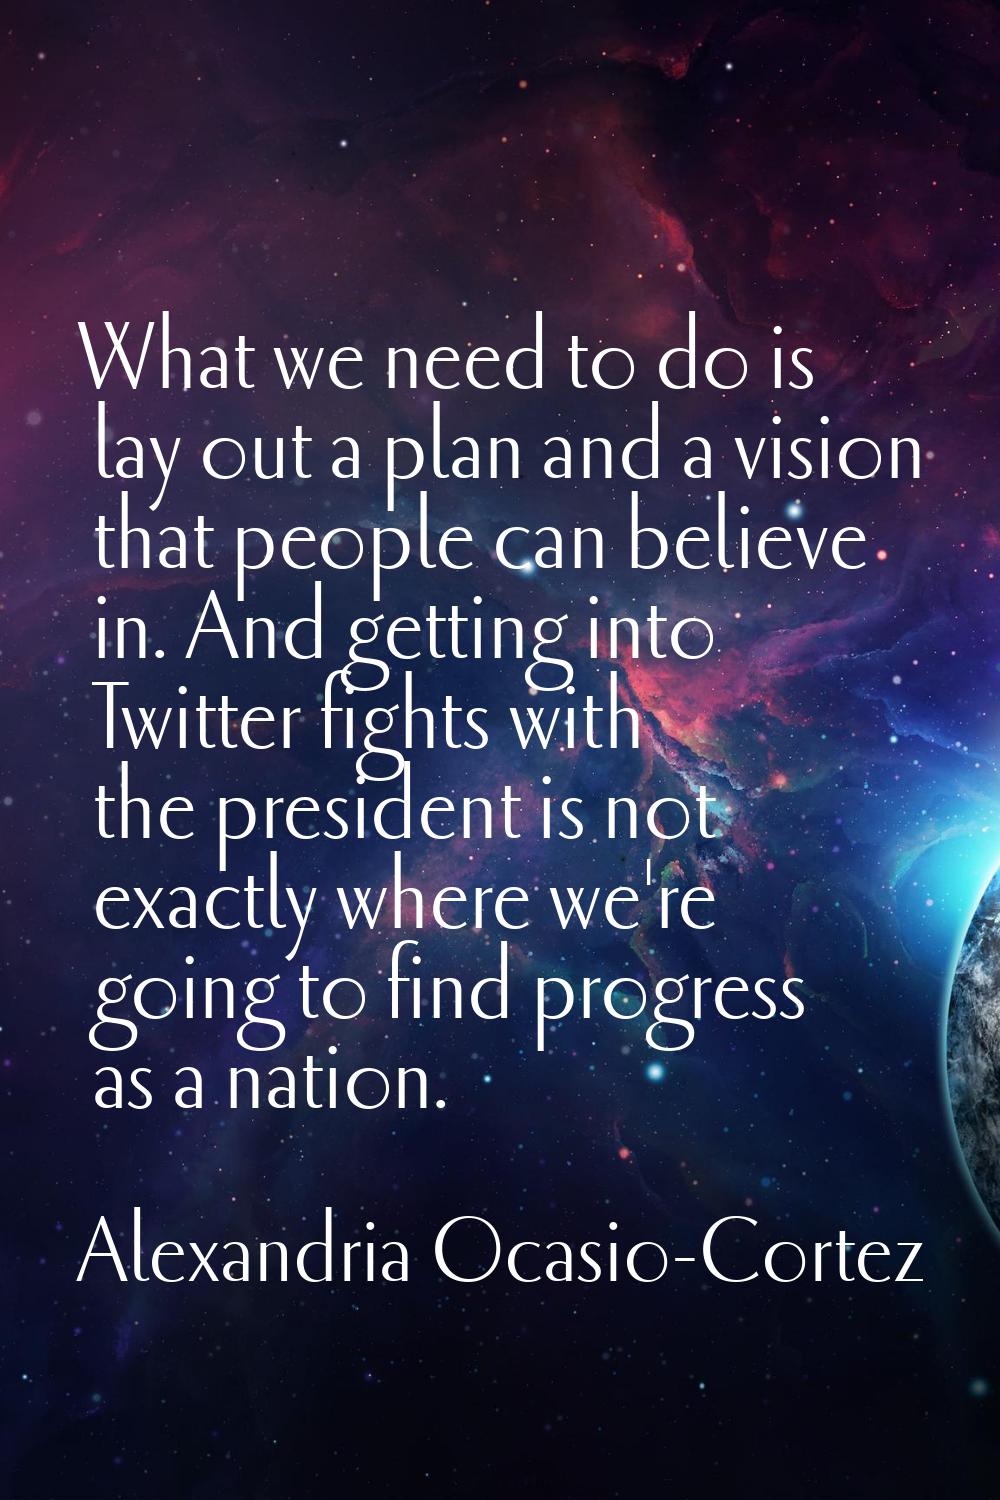 What we need to do is lay out a plan and a vision that people can believe in. And getting into Twit